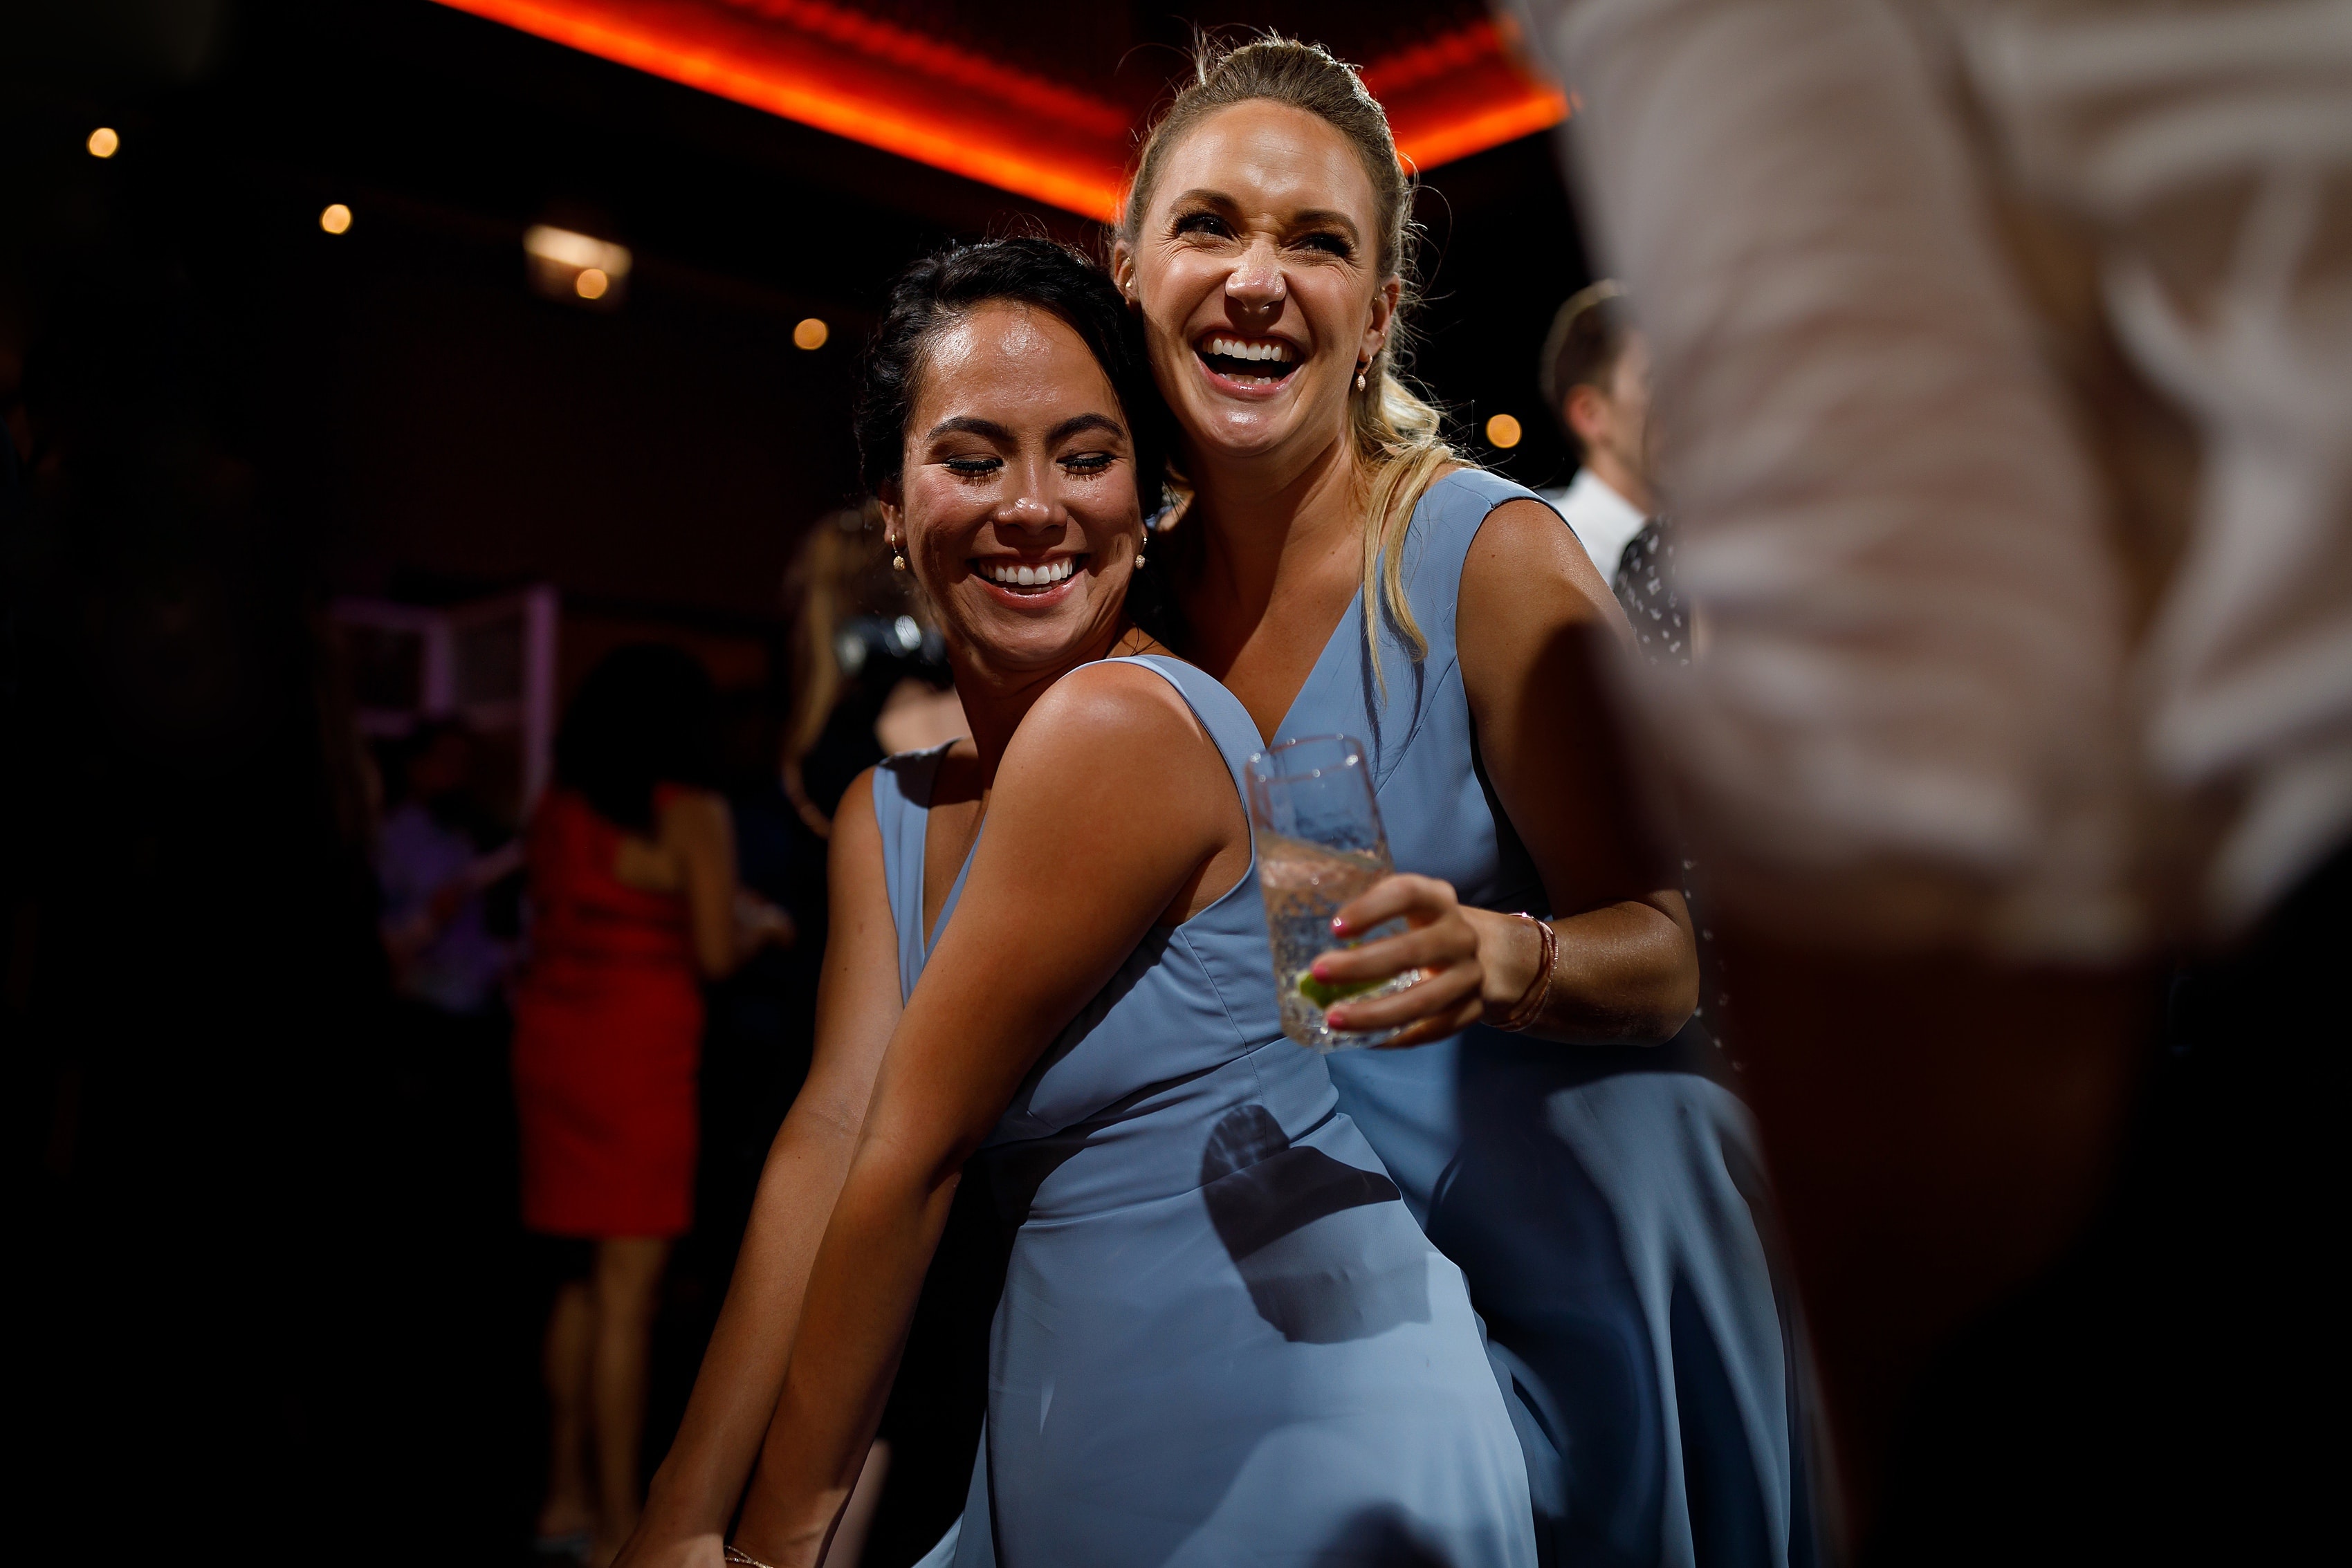 wedding guests dance during wedding reception at Boleo rooftop bar at Kimpton Gray Hotel in downtown Chicago